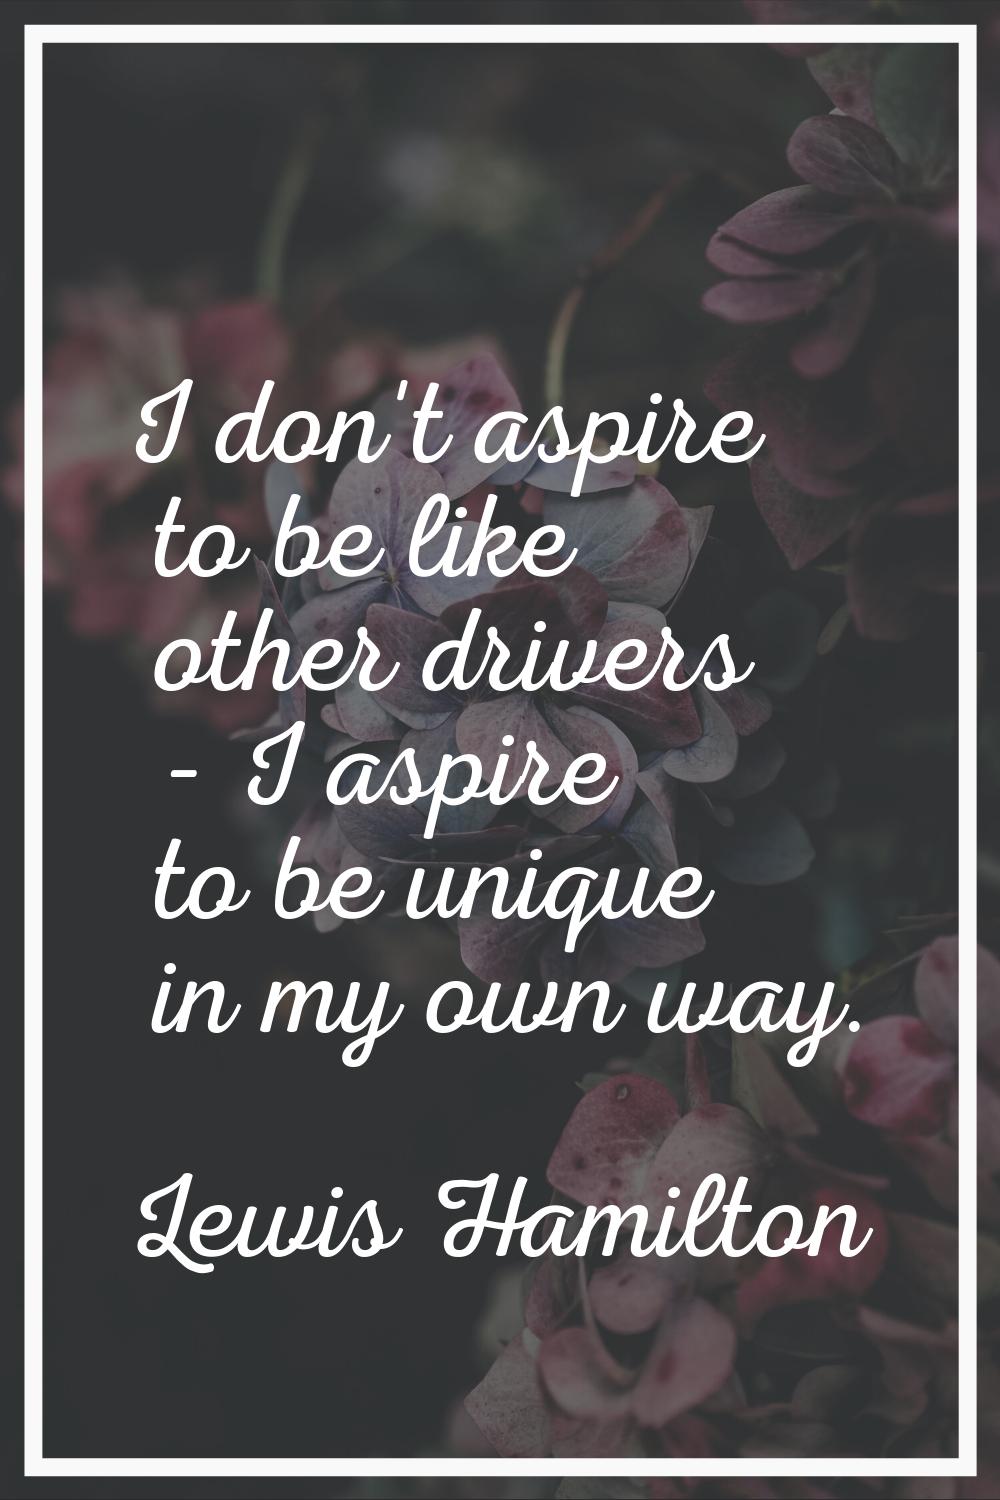 I don't aspire to be like other drivers - I aspire to be unique in my own way.